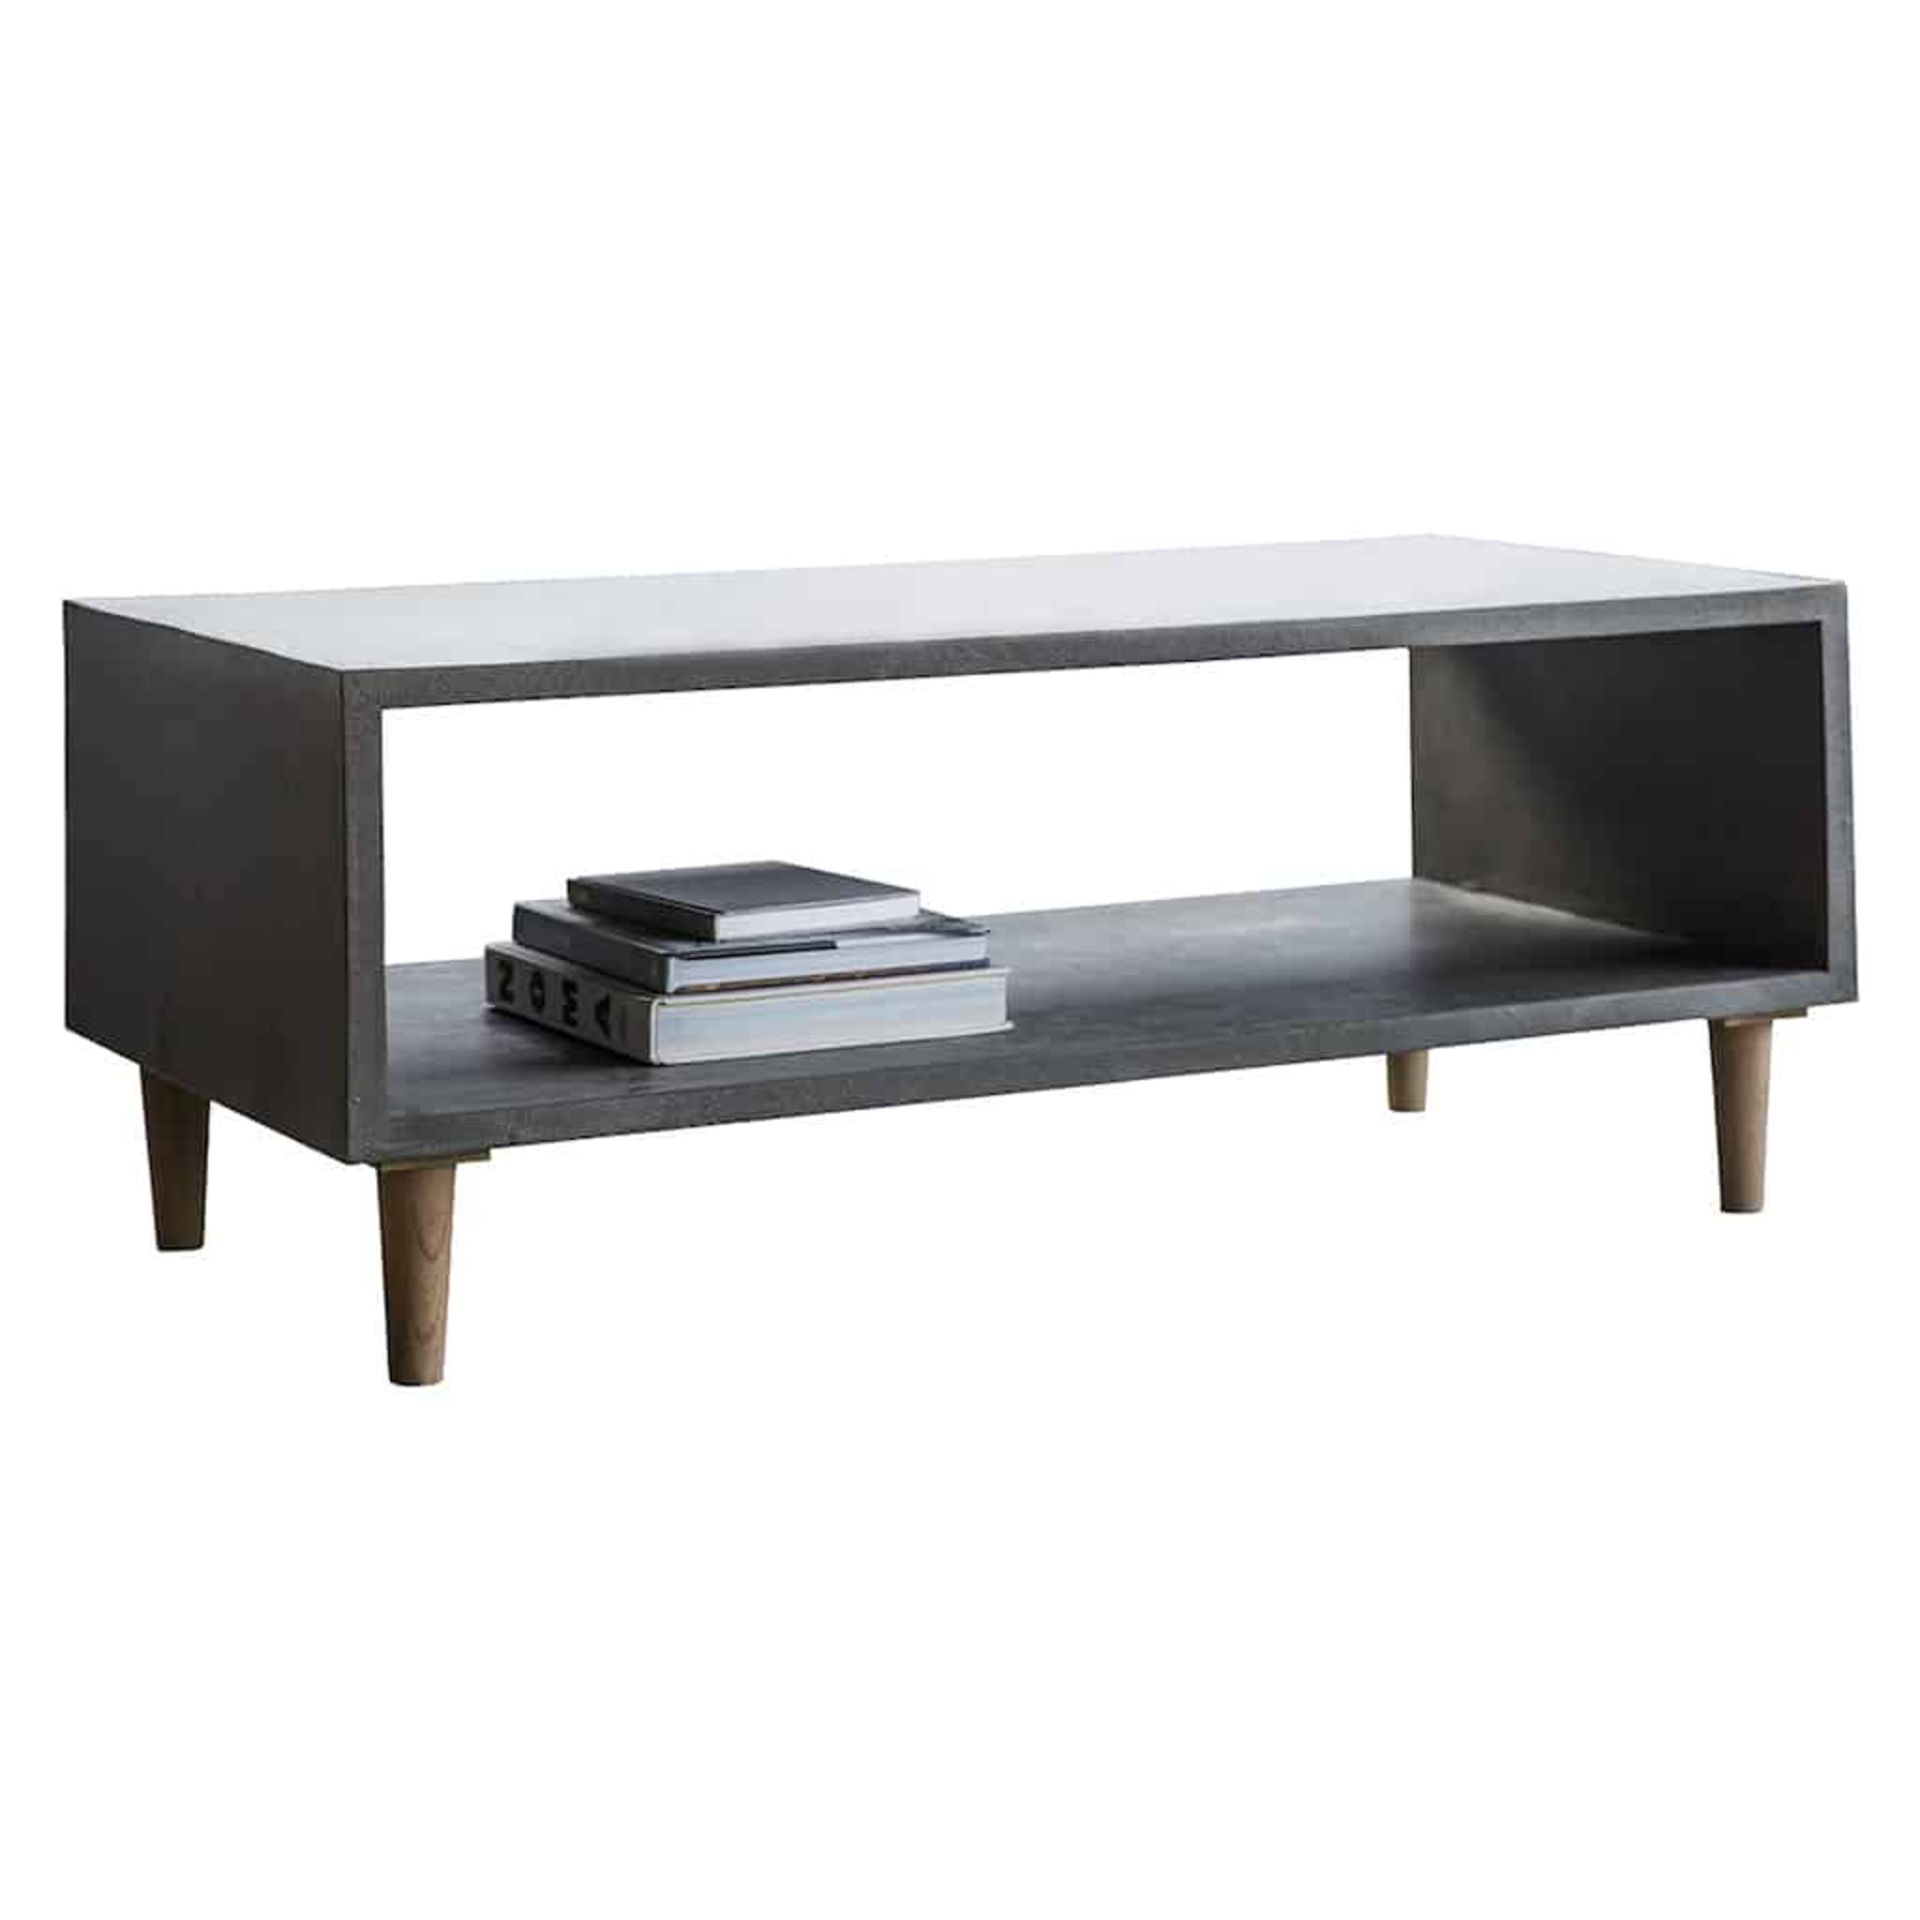 Bergen Cube Coffee Table The Bergen Cubed Coffee Table Has A Modern Meets Industrial Design In A - Bild 3 aus 3